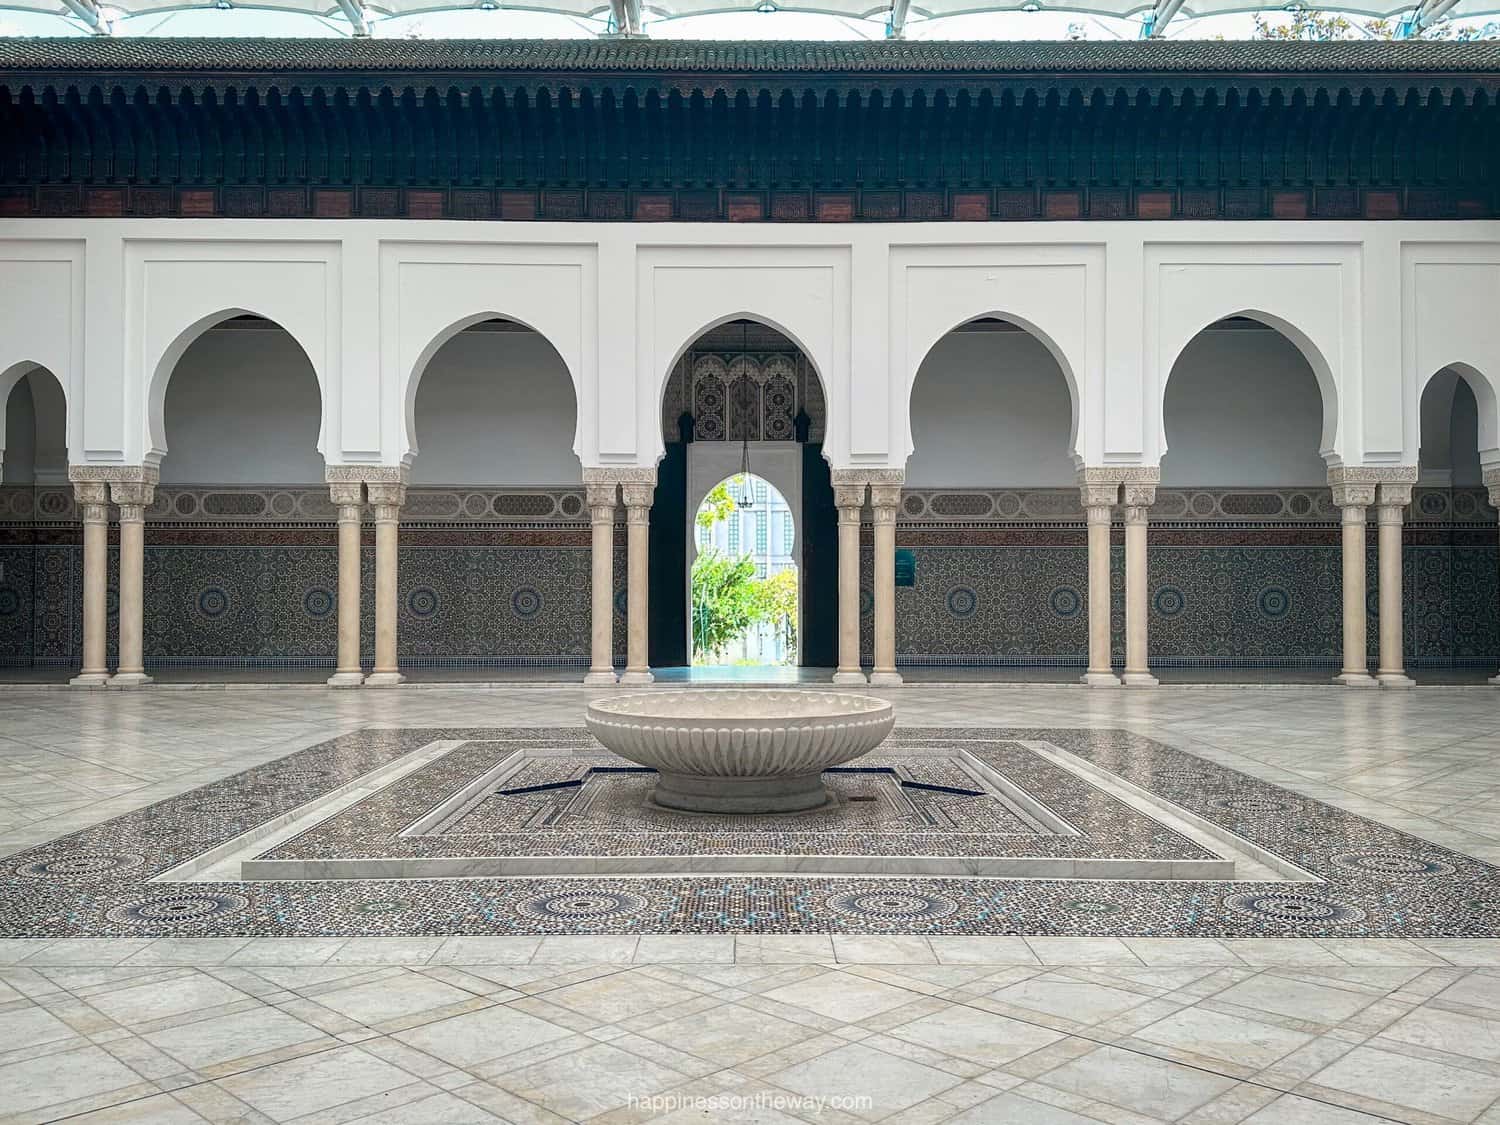 Courtyard of the  Grande Mosque de Paris adorned with colorful geometric-patterned mosaics and lush greenery.